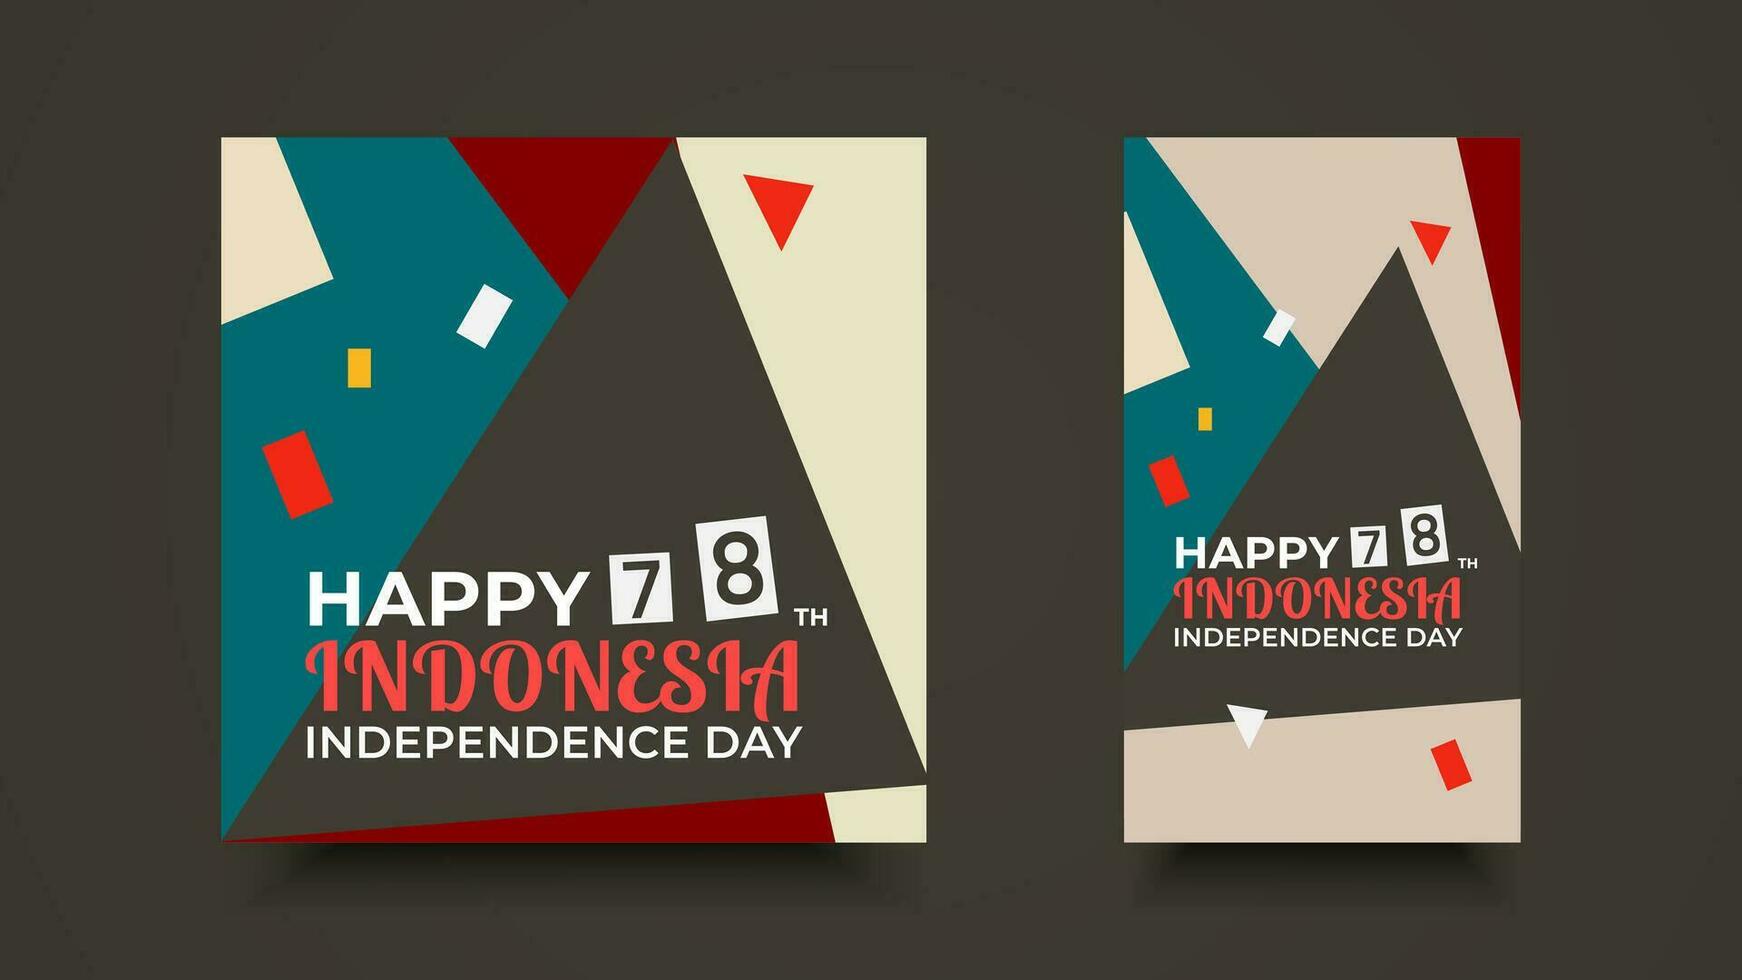 Happy 78th Indonesian independence Day. Retro style abstract design for greeting, social media, background, banner, card vector